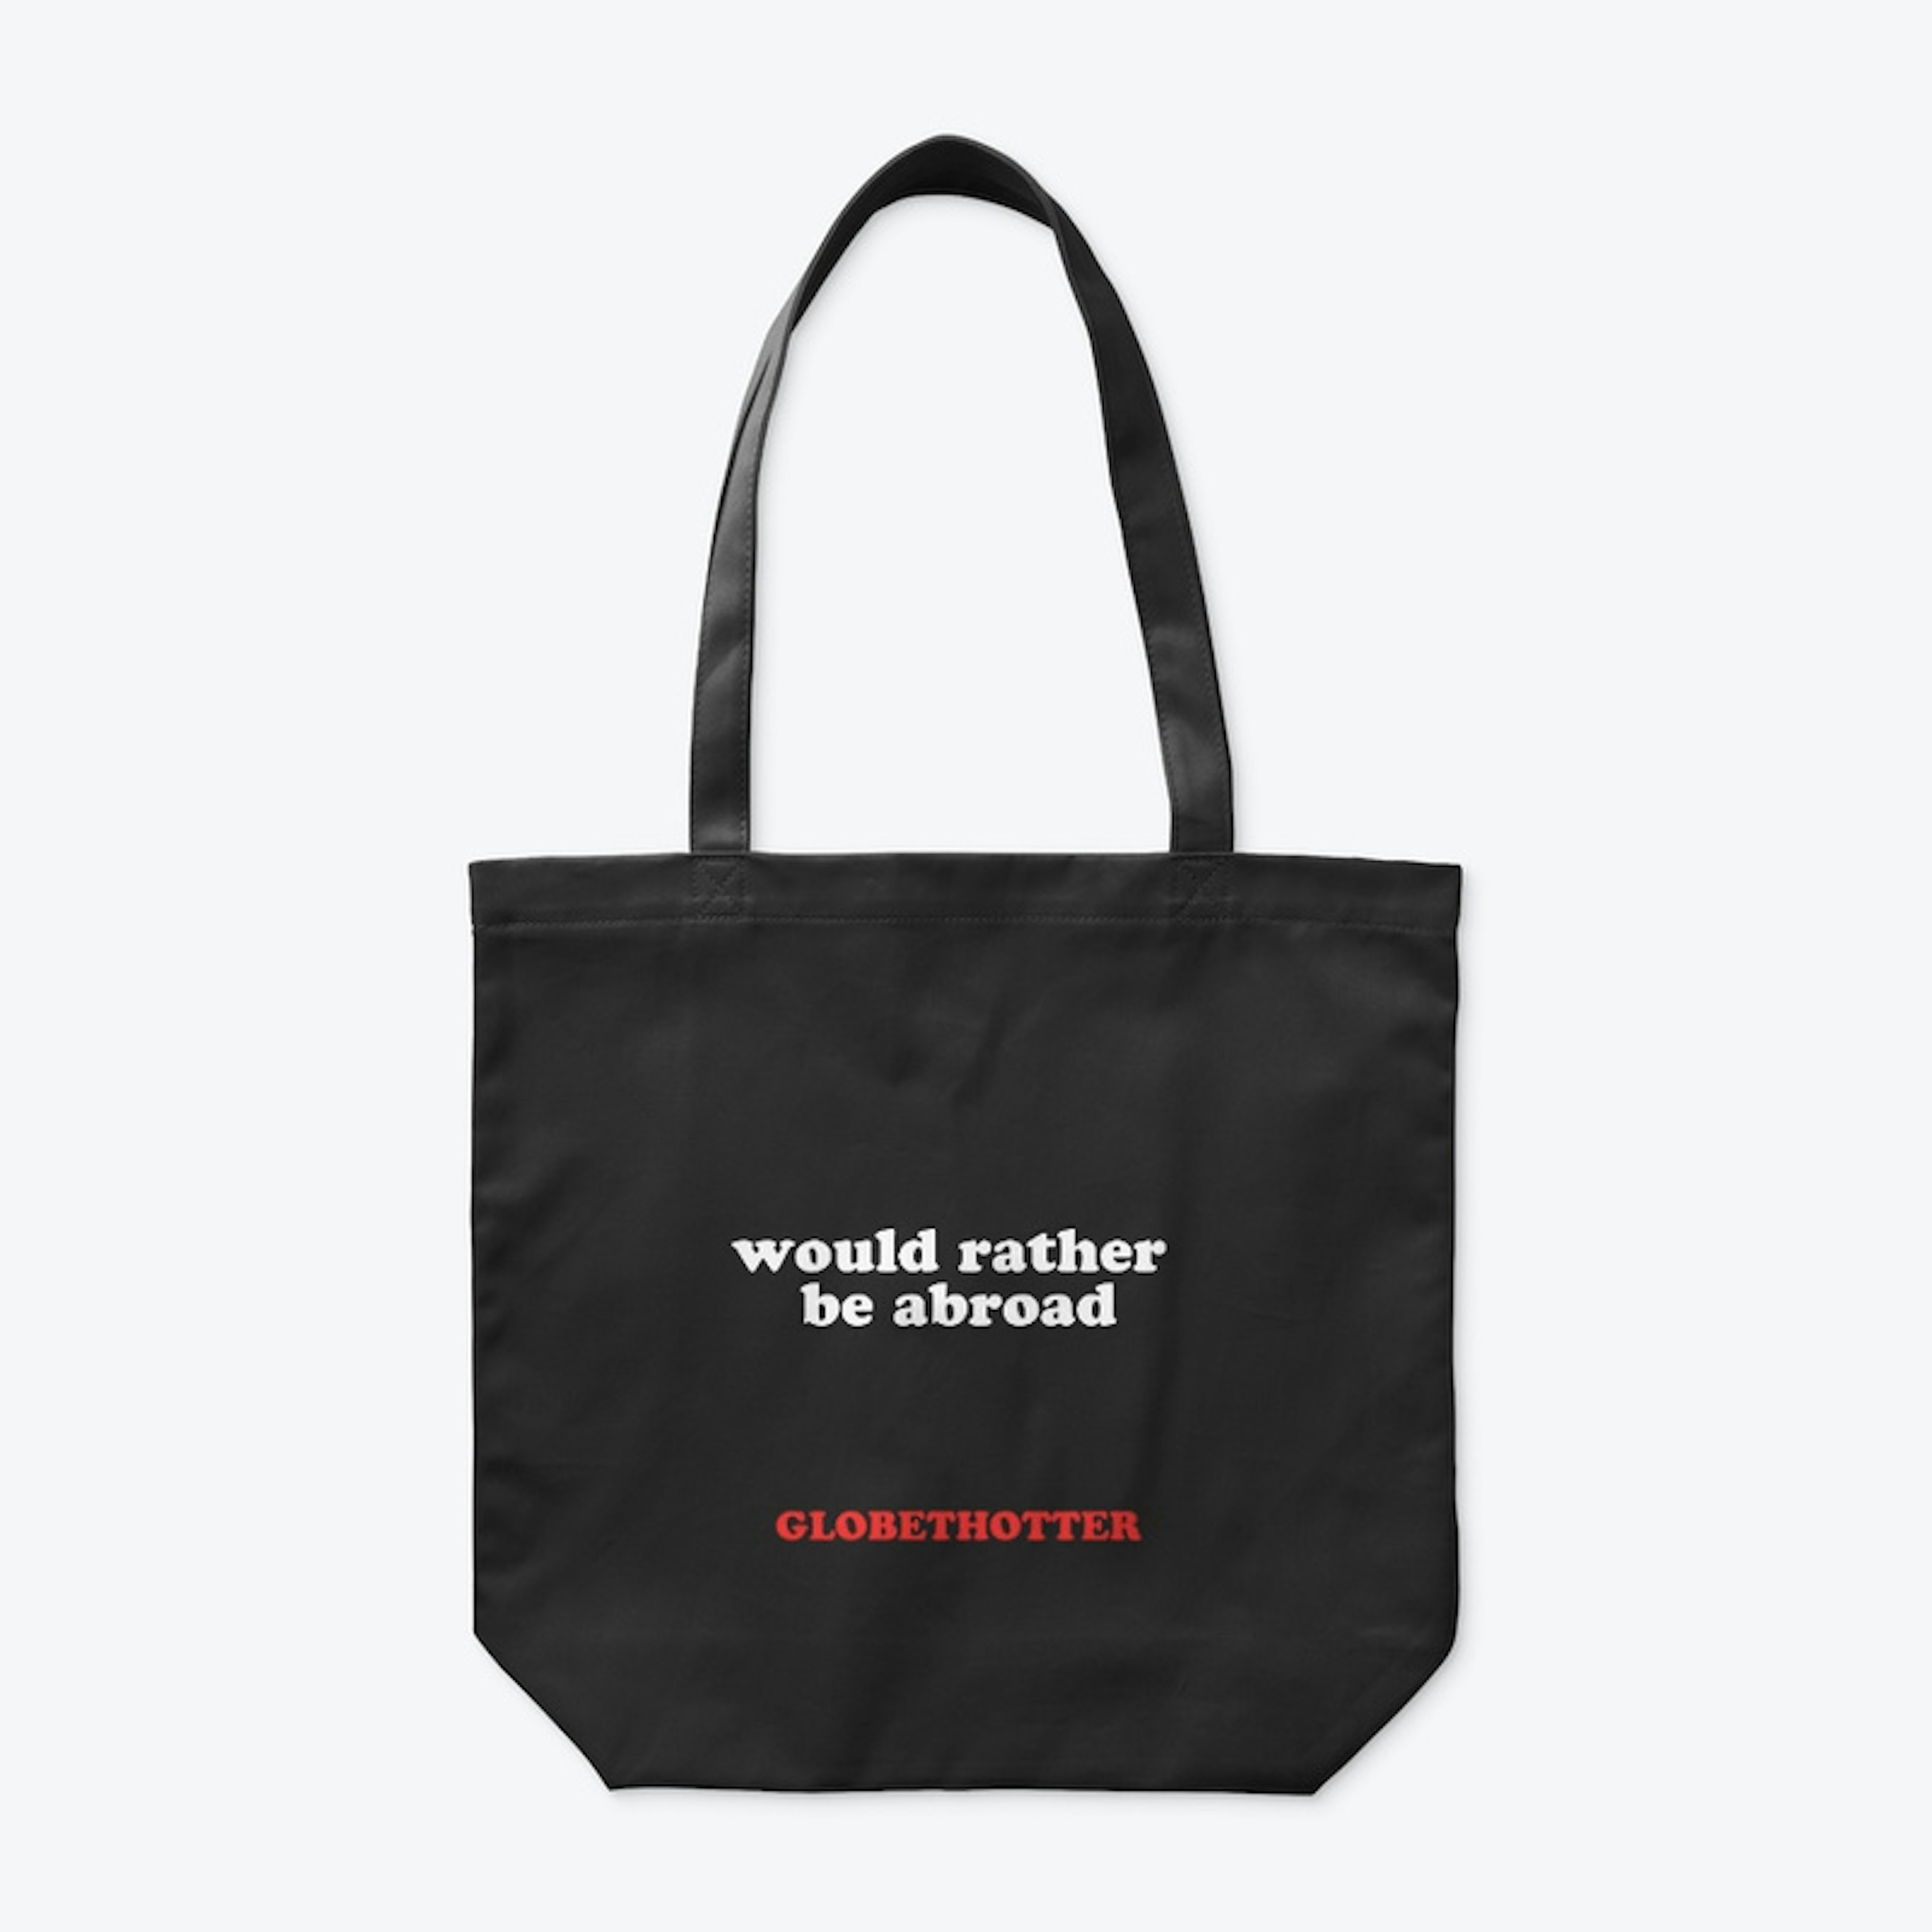 'Would Rather Be Abroad' totebag